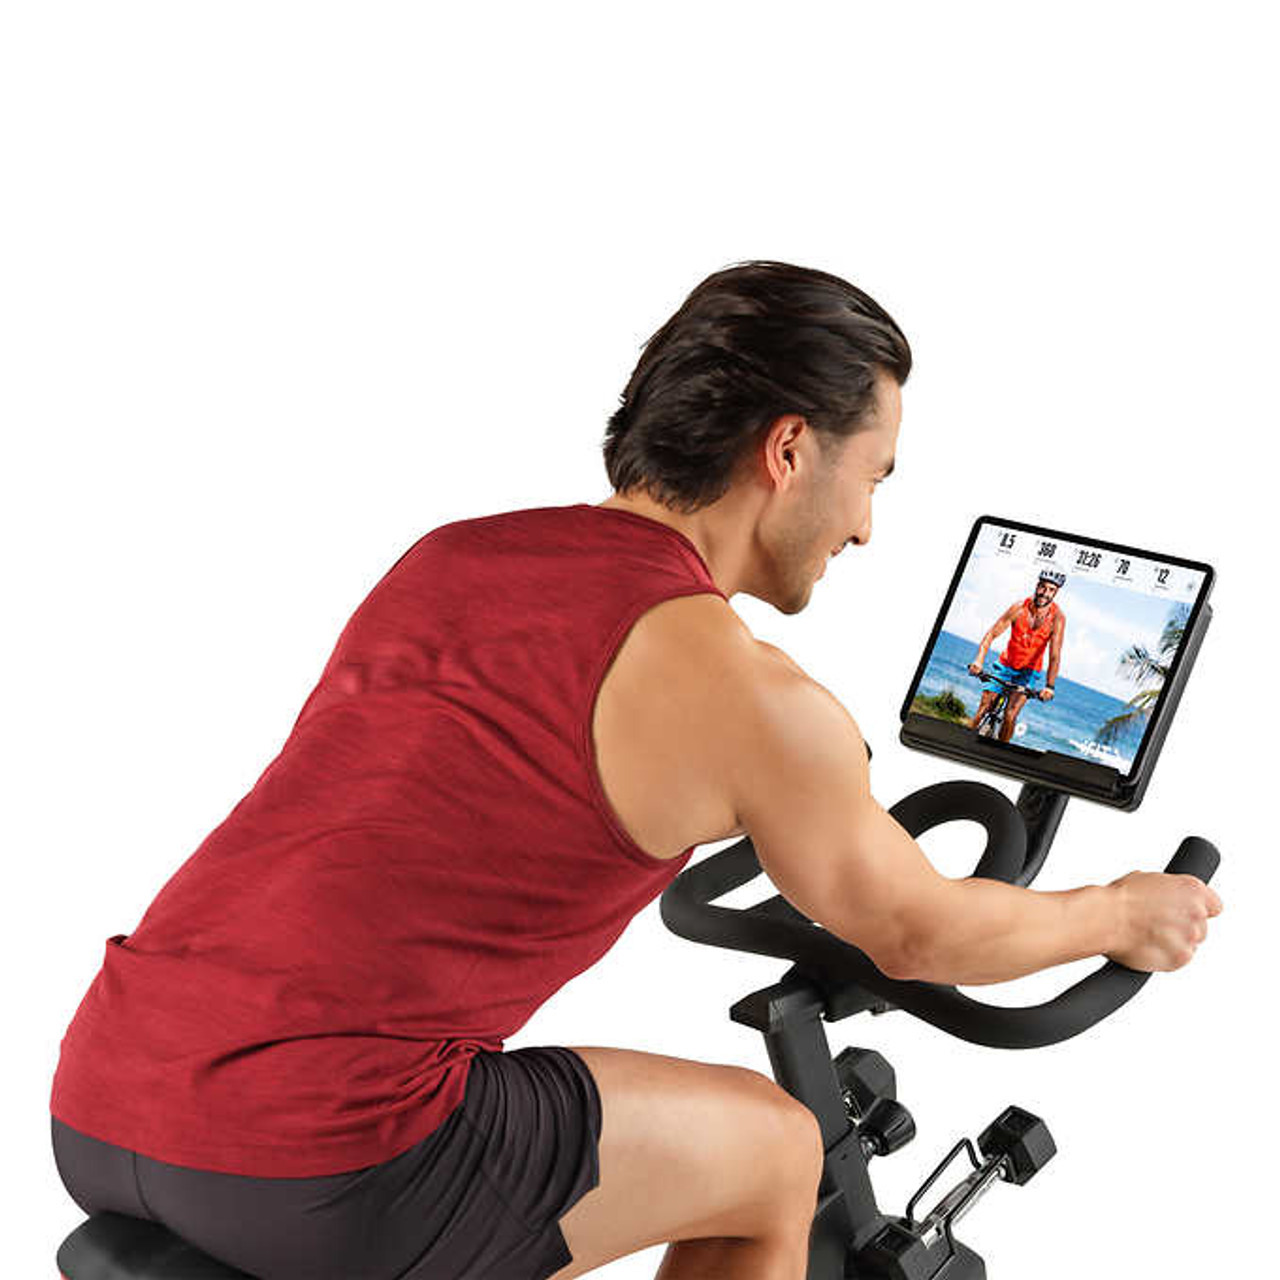 ProForm Pro Trainer 500 Cycle, Interactive Fitness with Large window LCD display - Chicken Pieces